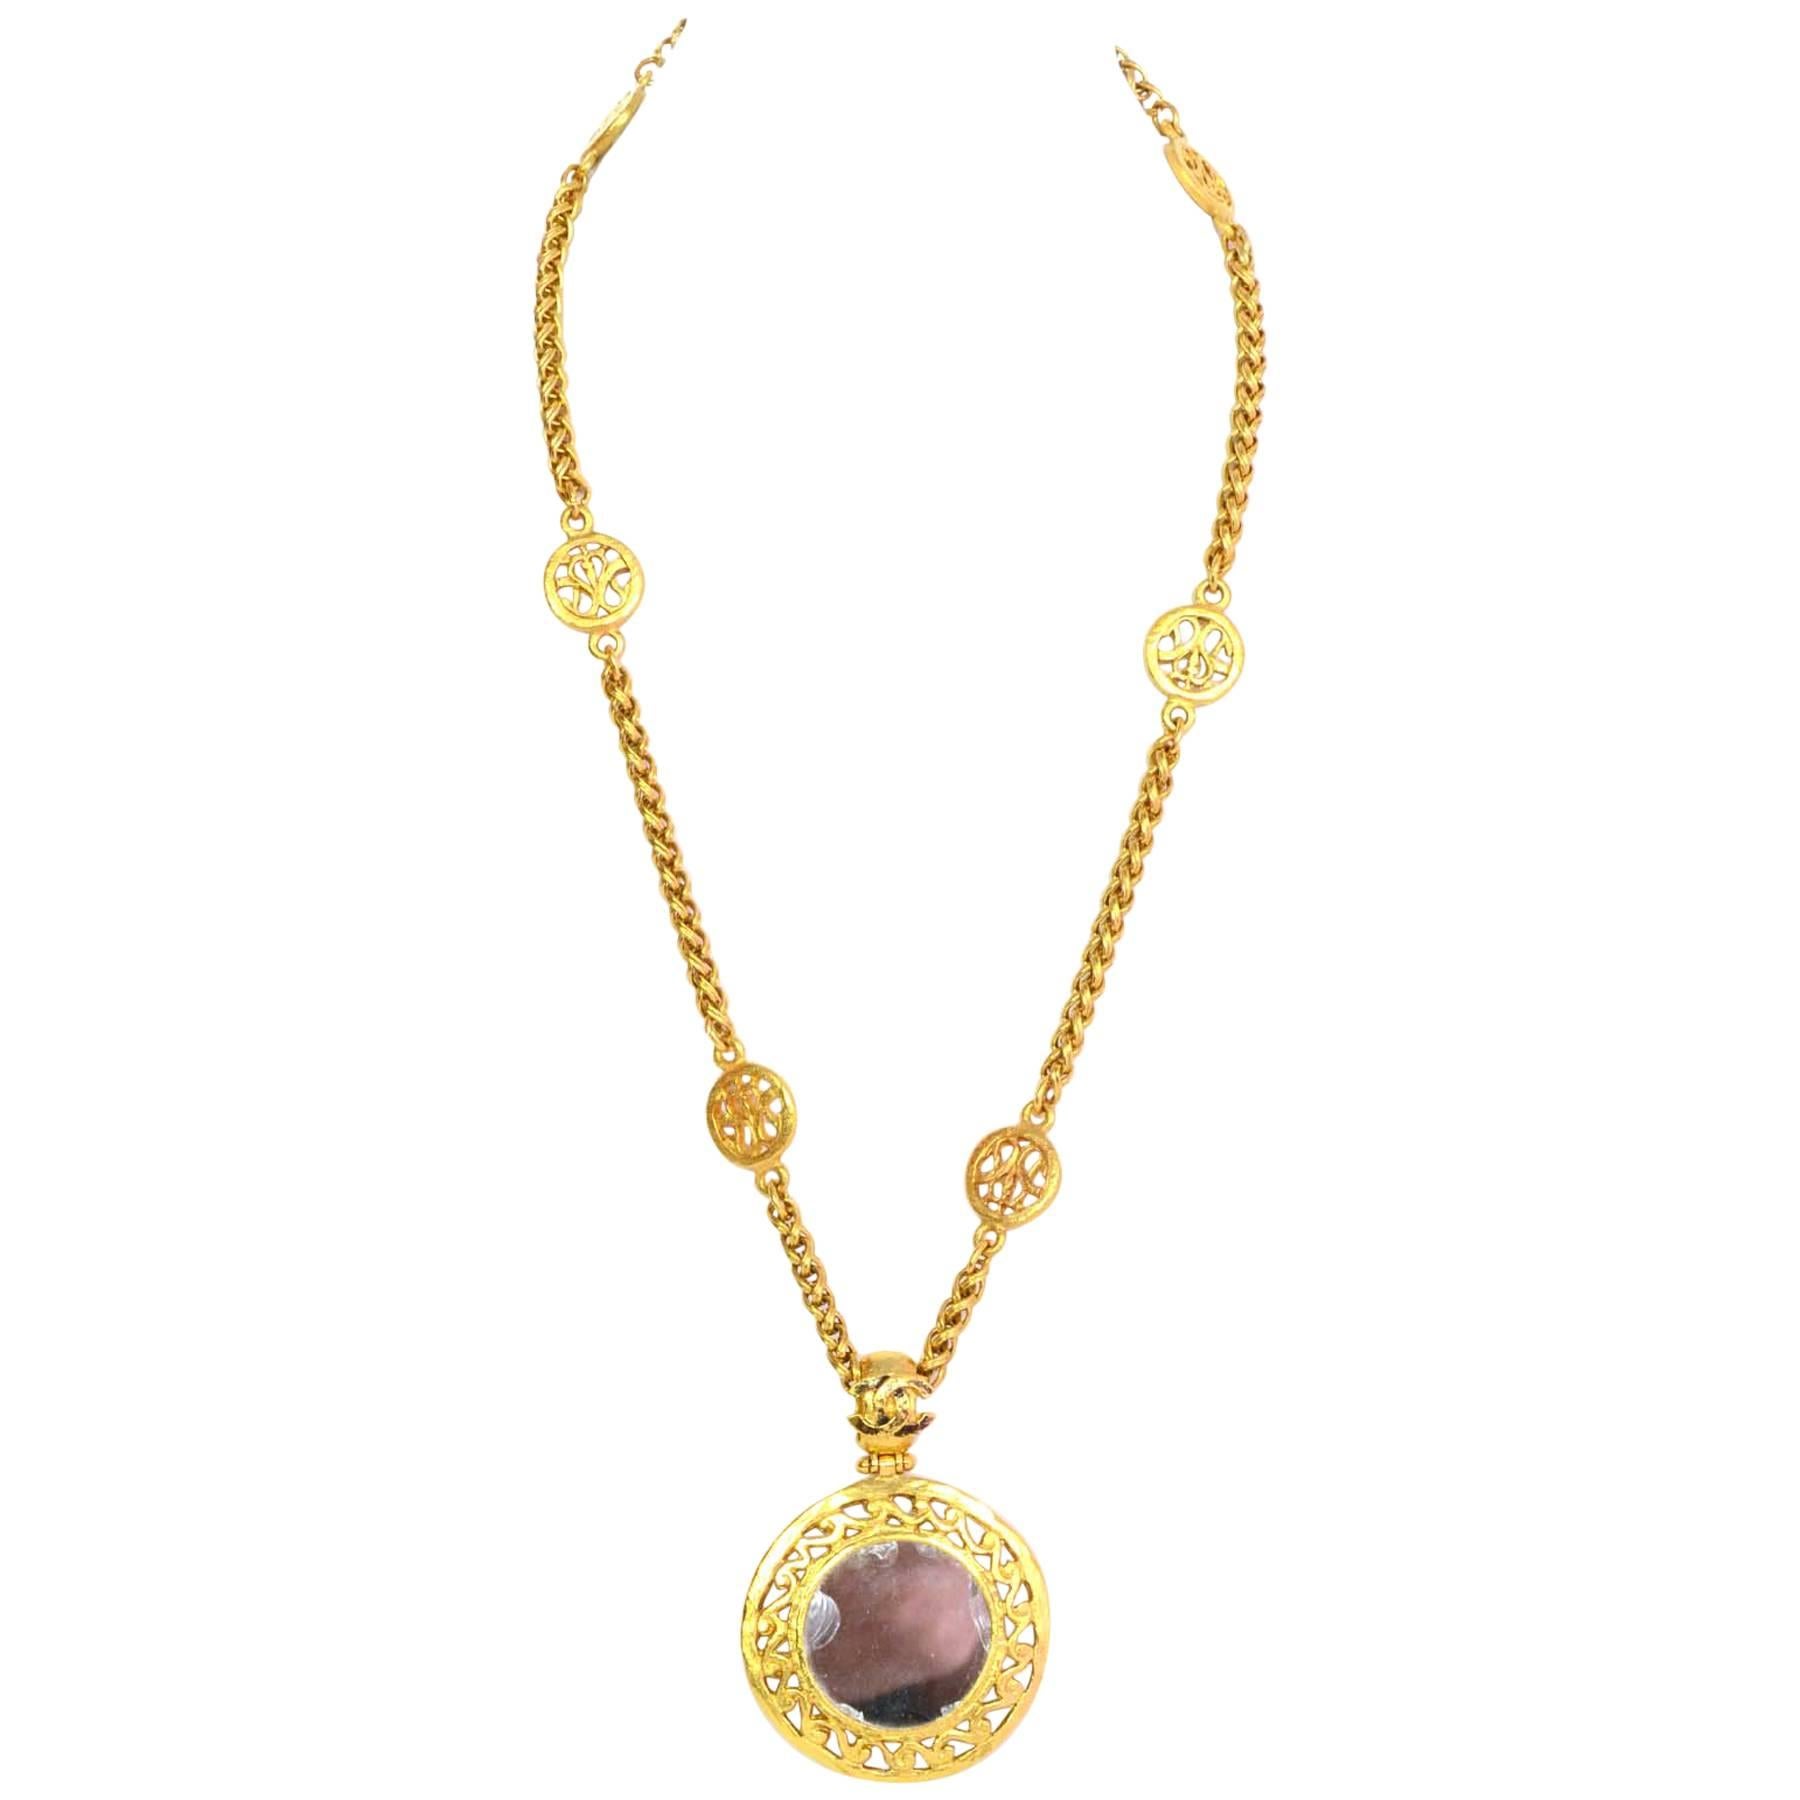 Chanel Gold-tone Mirror Necklace

Features circle mirrior pendant

Made In: France
Year of Production: Autumn 1995
Color: Goldtone
Materials: Metal
Closure: Hook and eye closure
Stamp: Chanel 95 CC A made in France
Overall Condition: Excellent